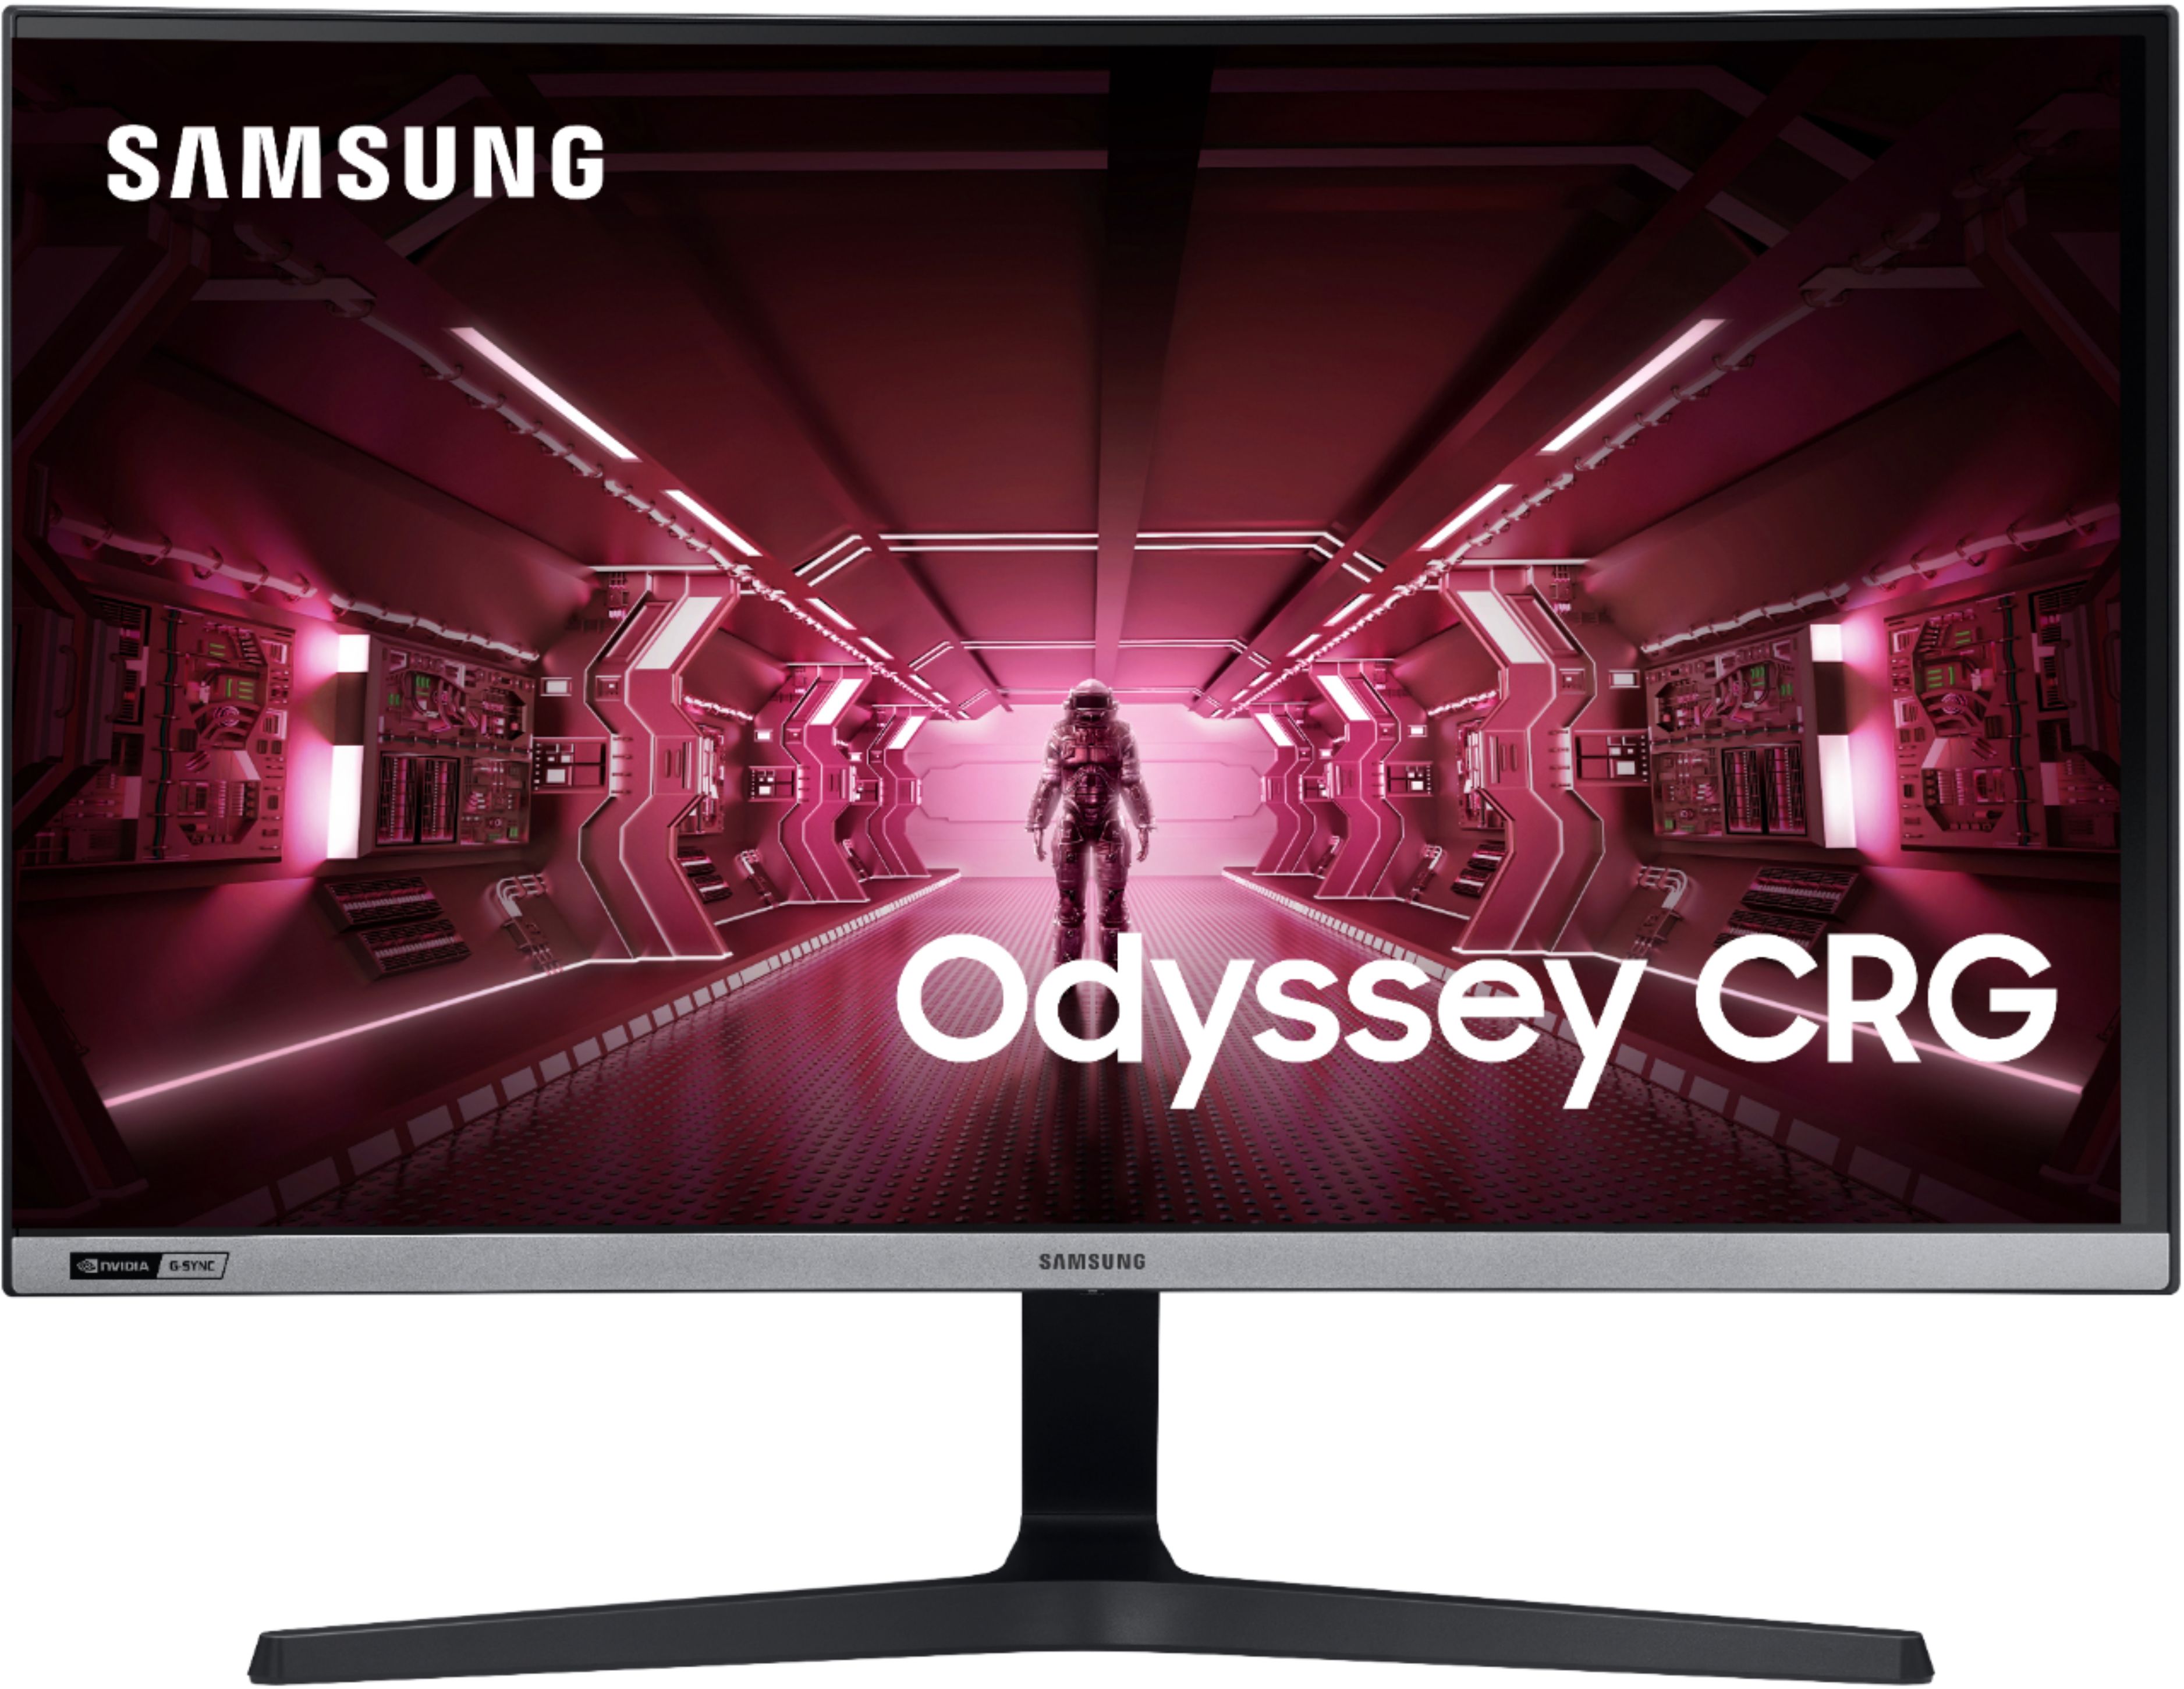 Samsung - Odyssey Gaming CRG5 Series 27" 240Hz LED Curved FHD G-Sync Monitor - Dark Blue/Gray - $250 with free shipping @ Best Buy